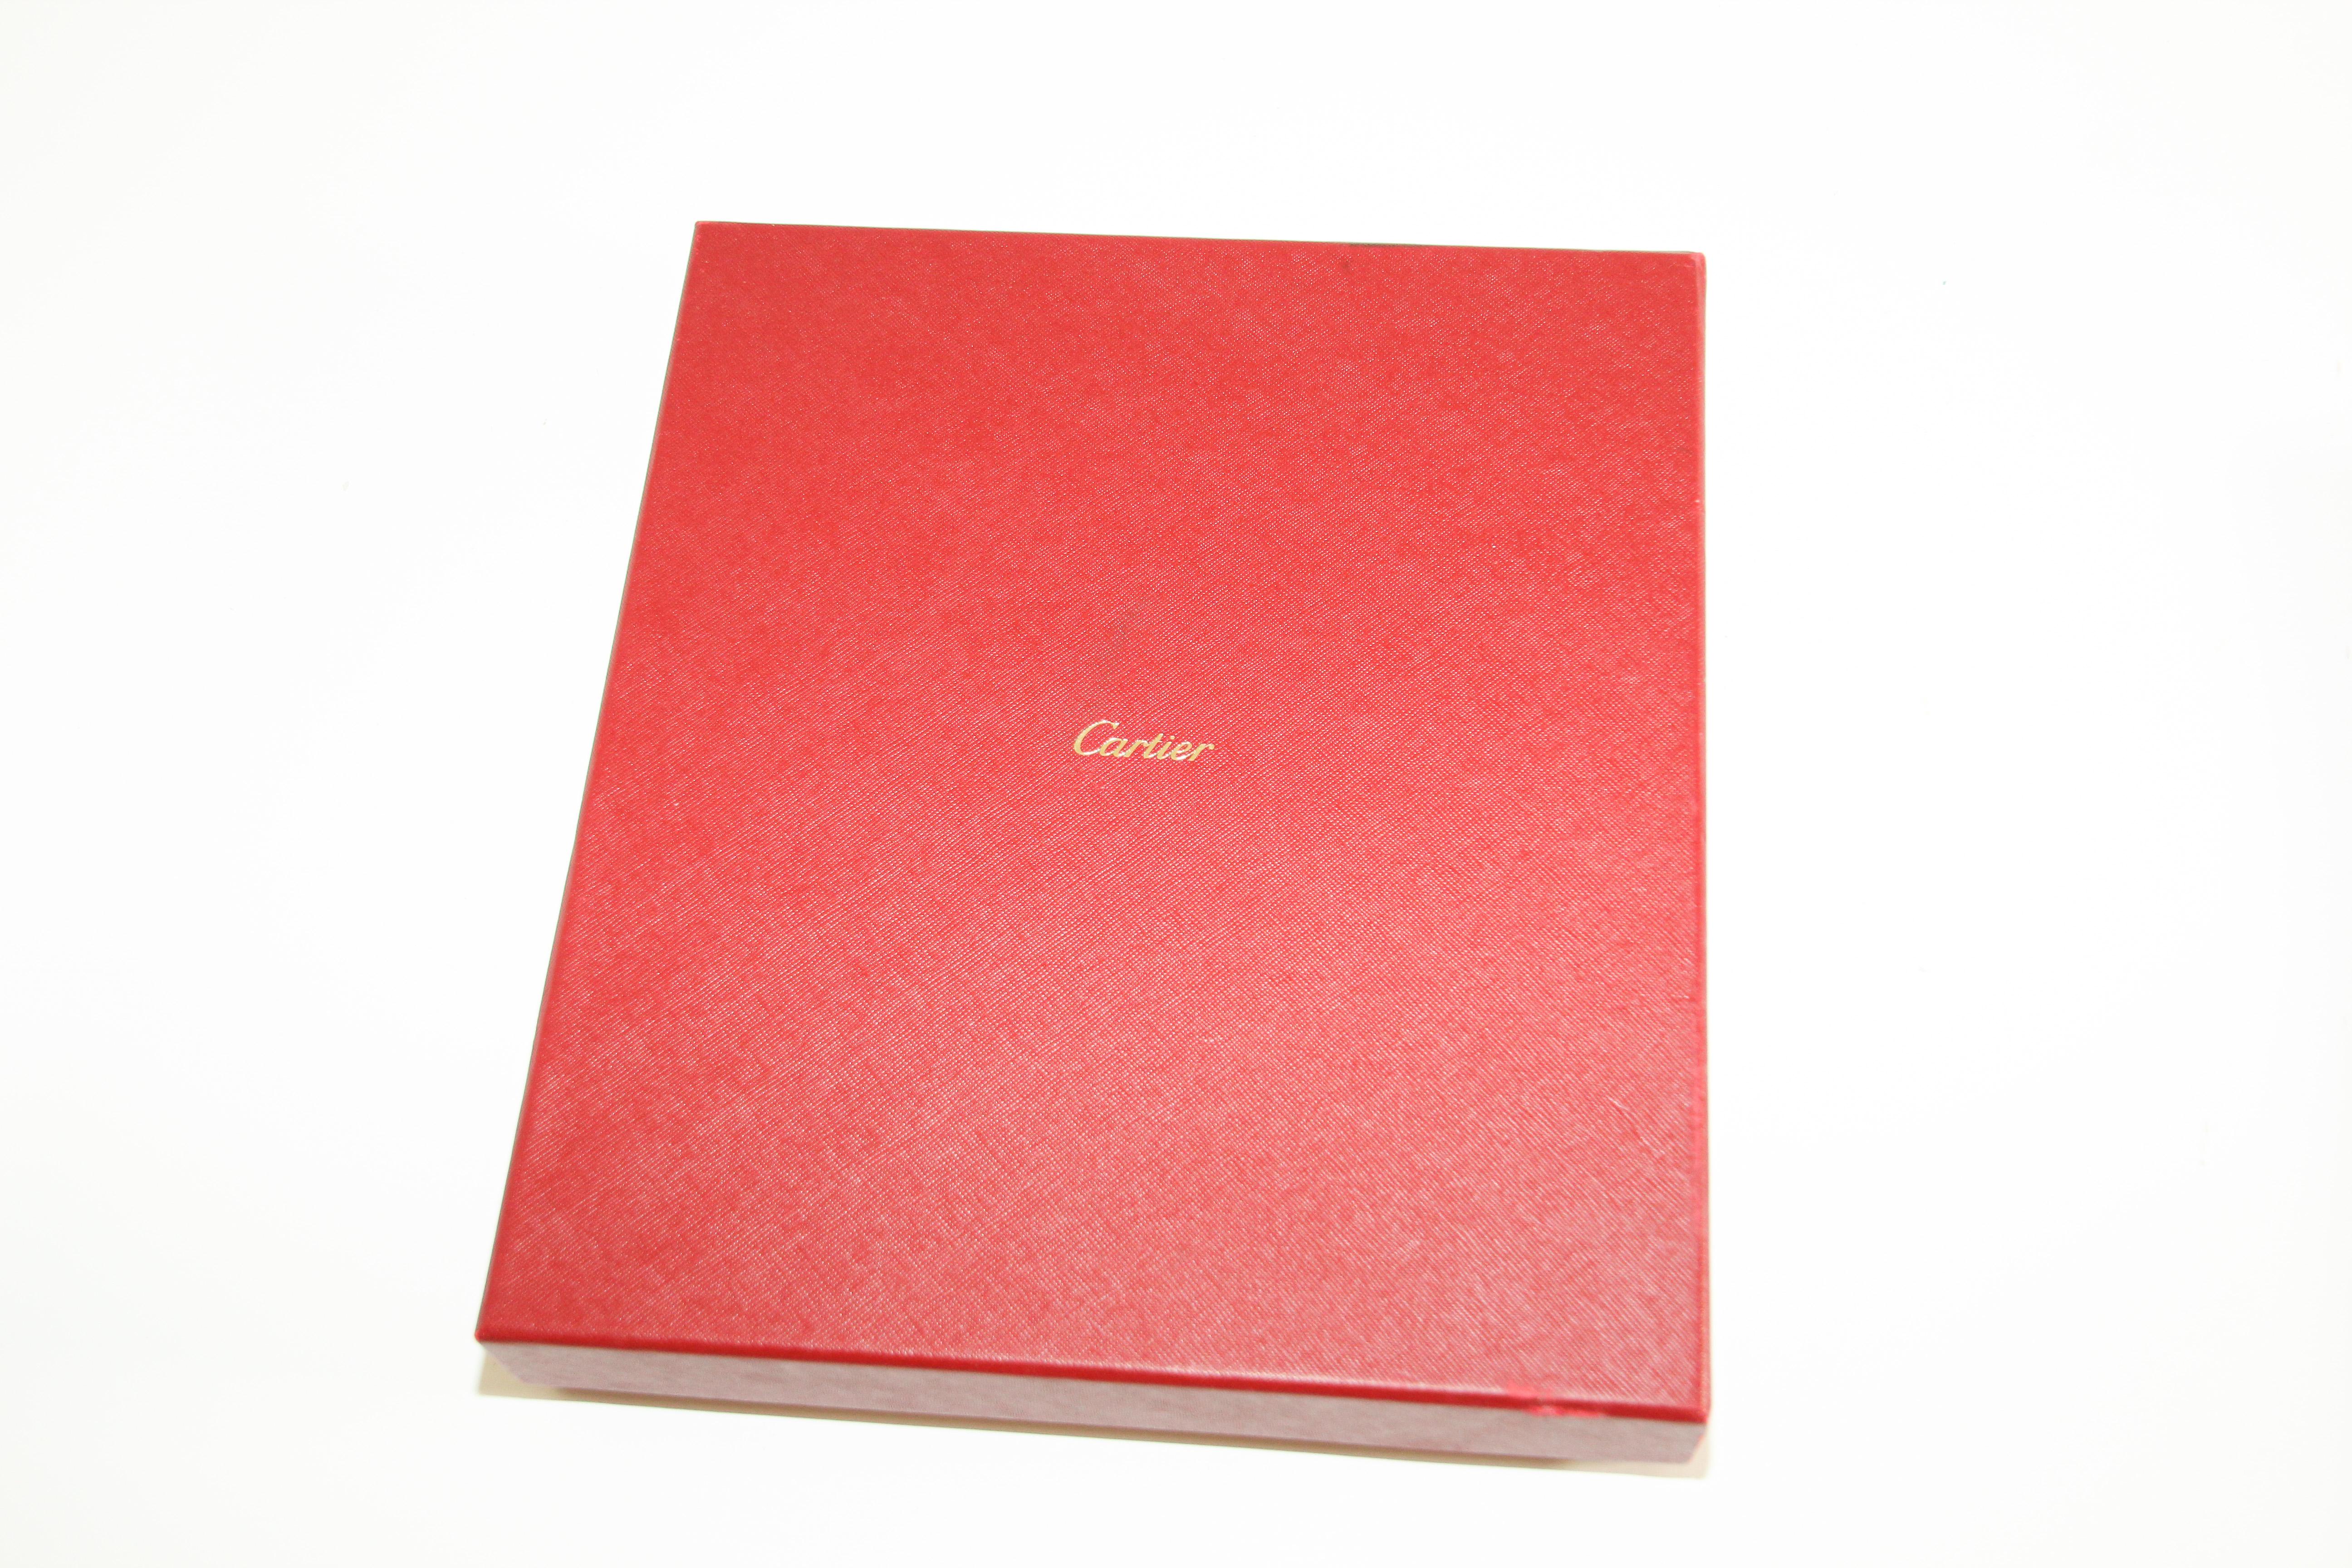 This is a circa 1980s original Cartier panther photo album.
Cartier luxe photo album in burgundy leather a beautiful and exquisite album where you can place and store those valuable photos.
Cartier's photo album features the signature panther. It's